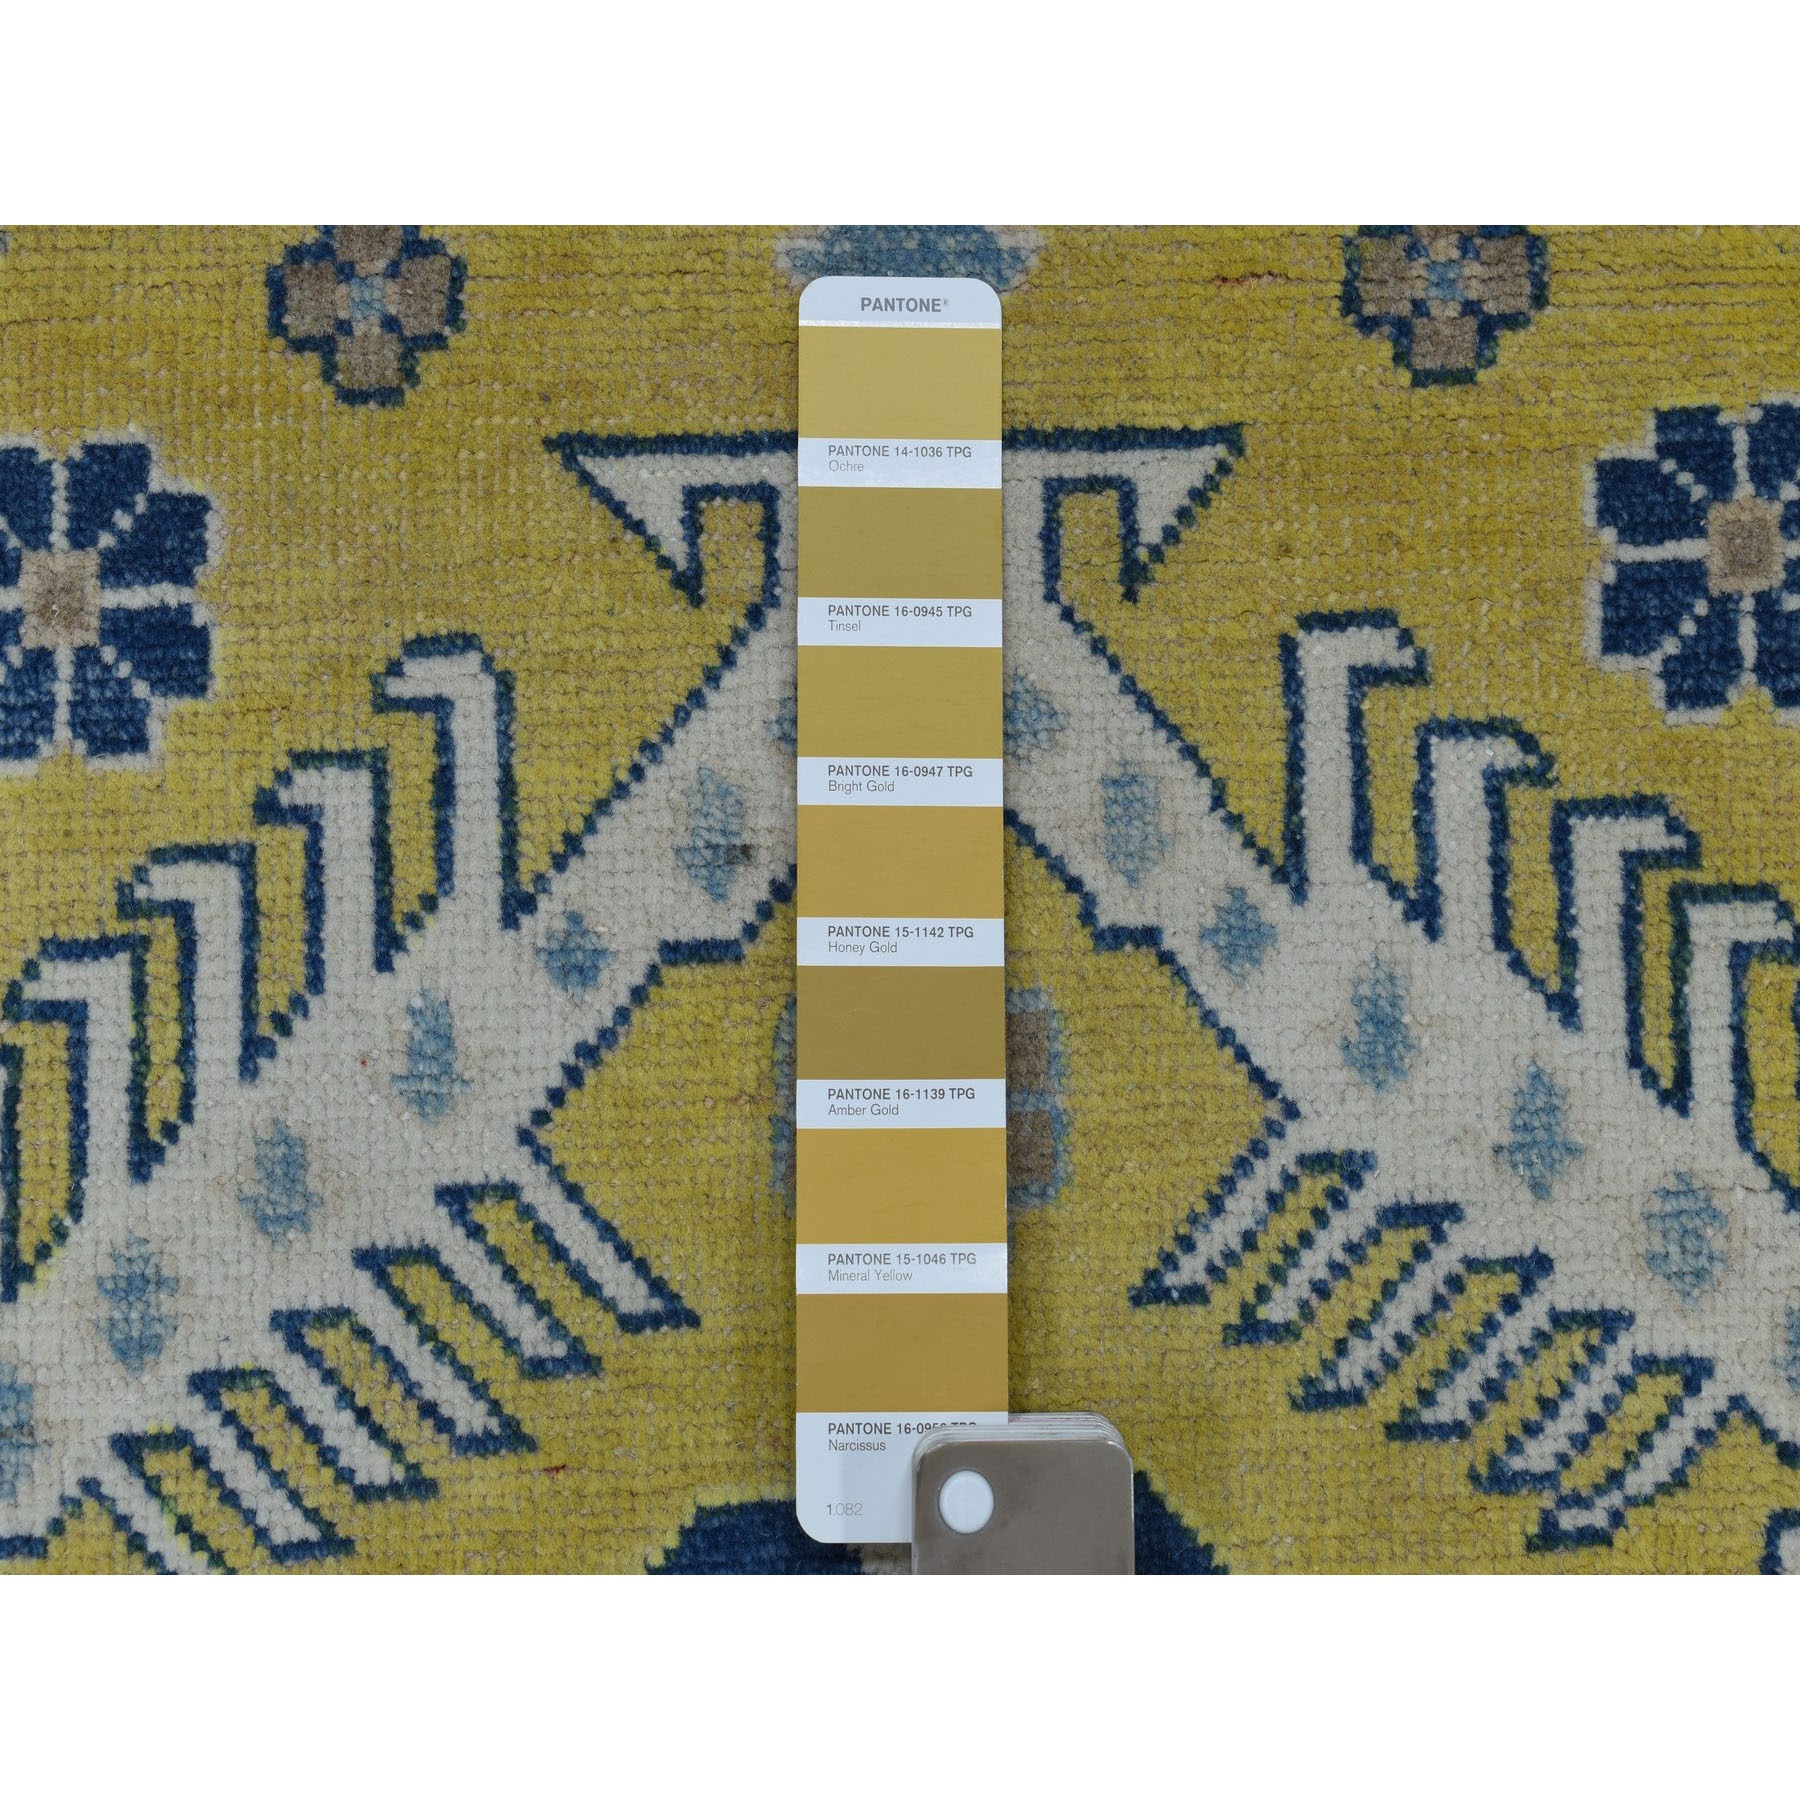 4-x6-4  Colorful Yellow Fusion Kazak Pure Wool Hand Knotted Oriental Rug 